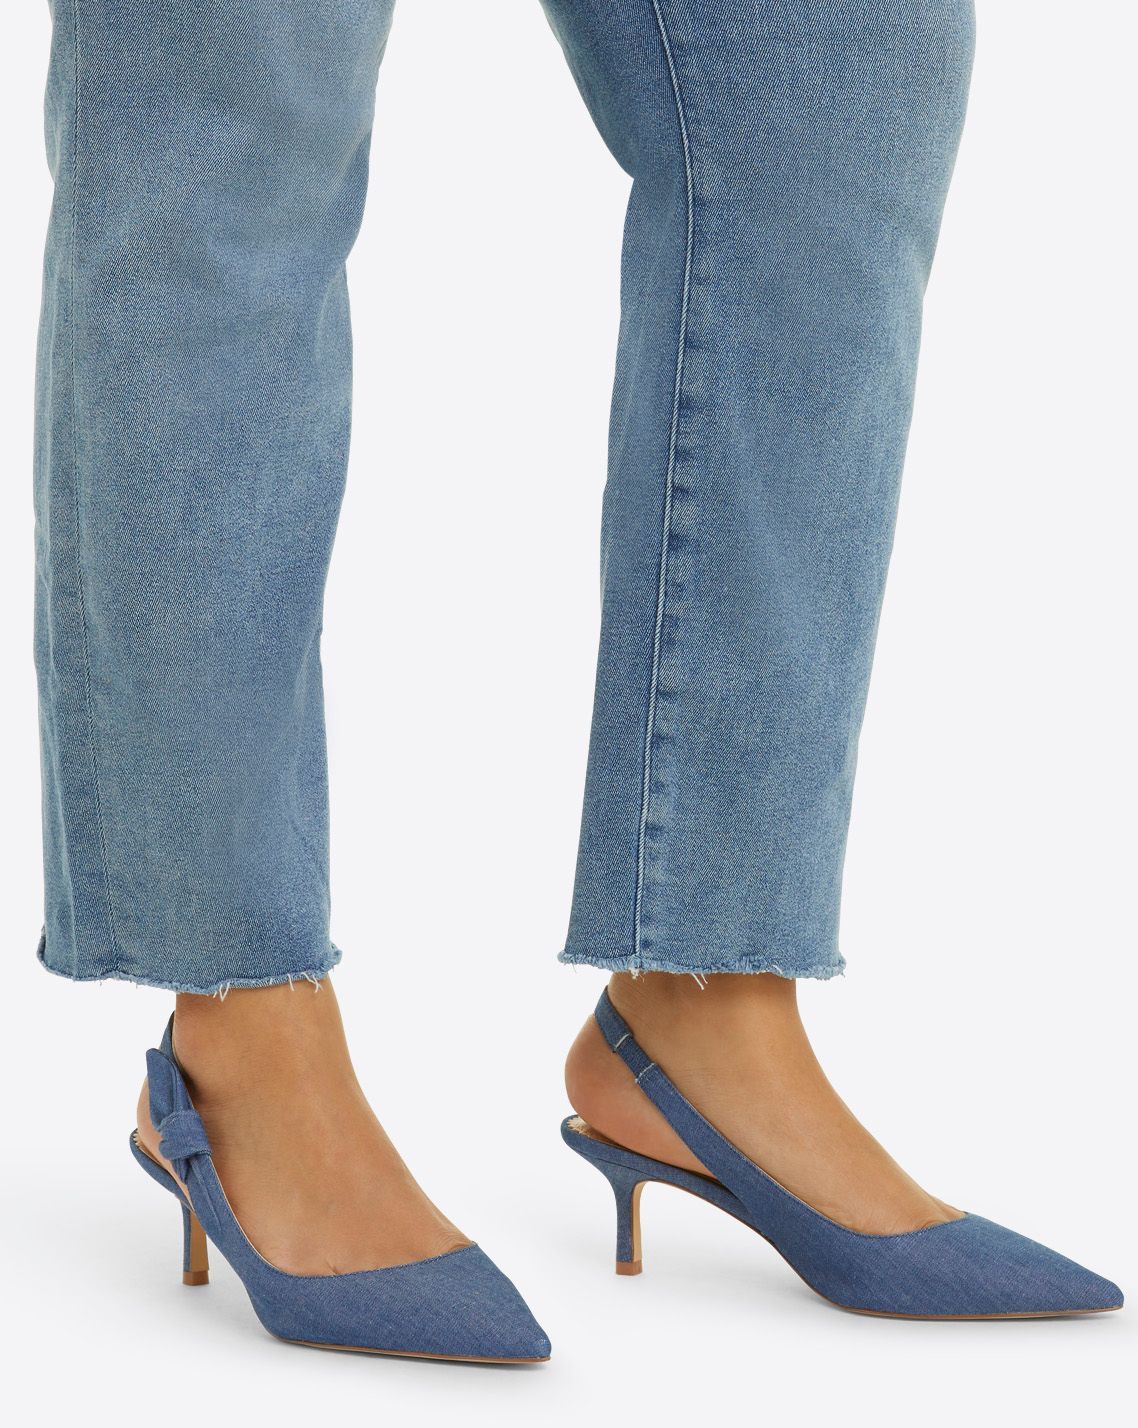 Willow Slingback Heels in Chambray | Draper James (US)